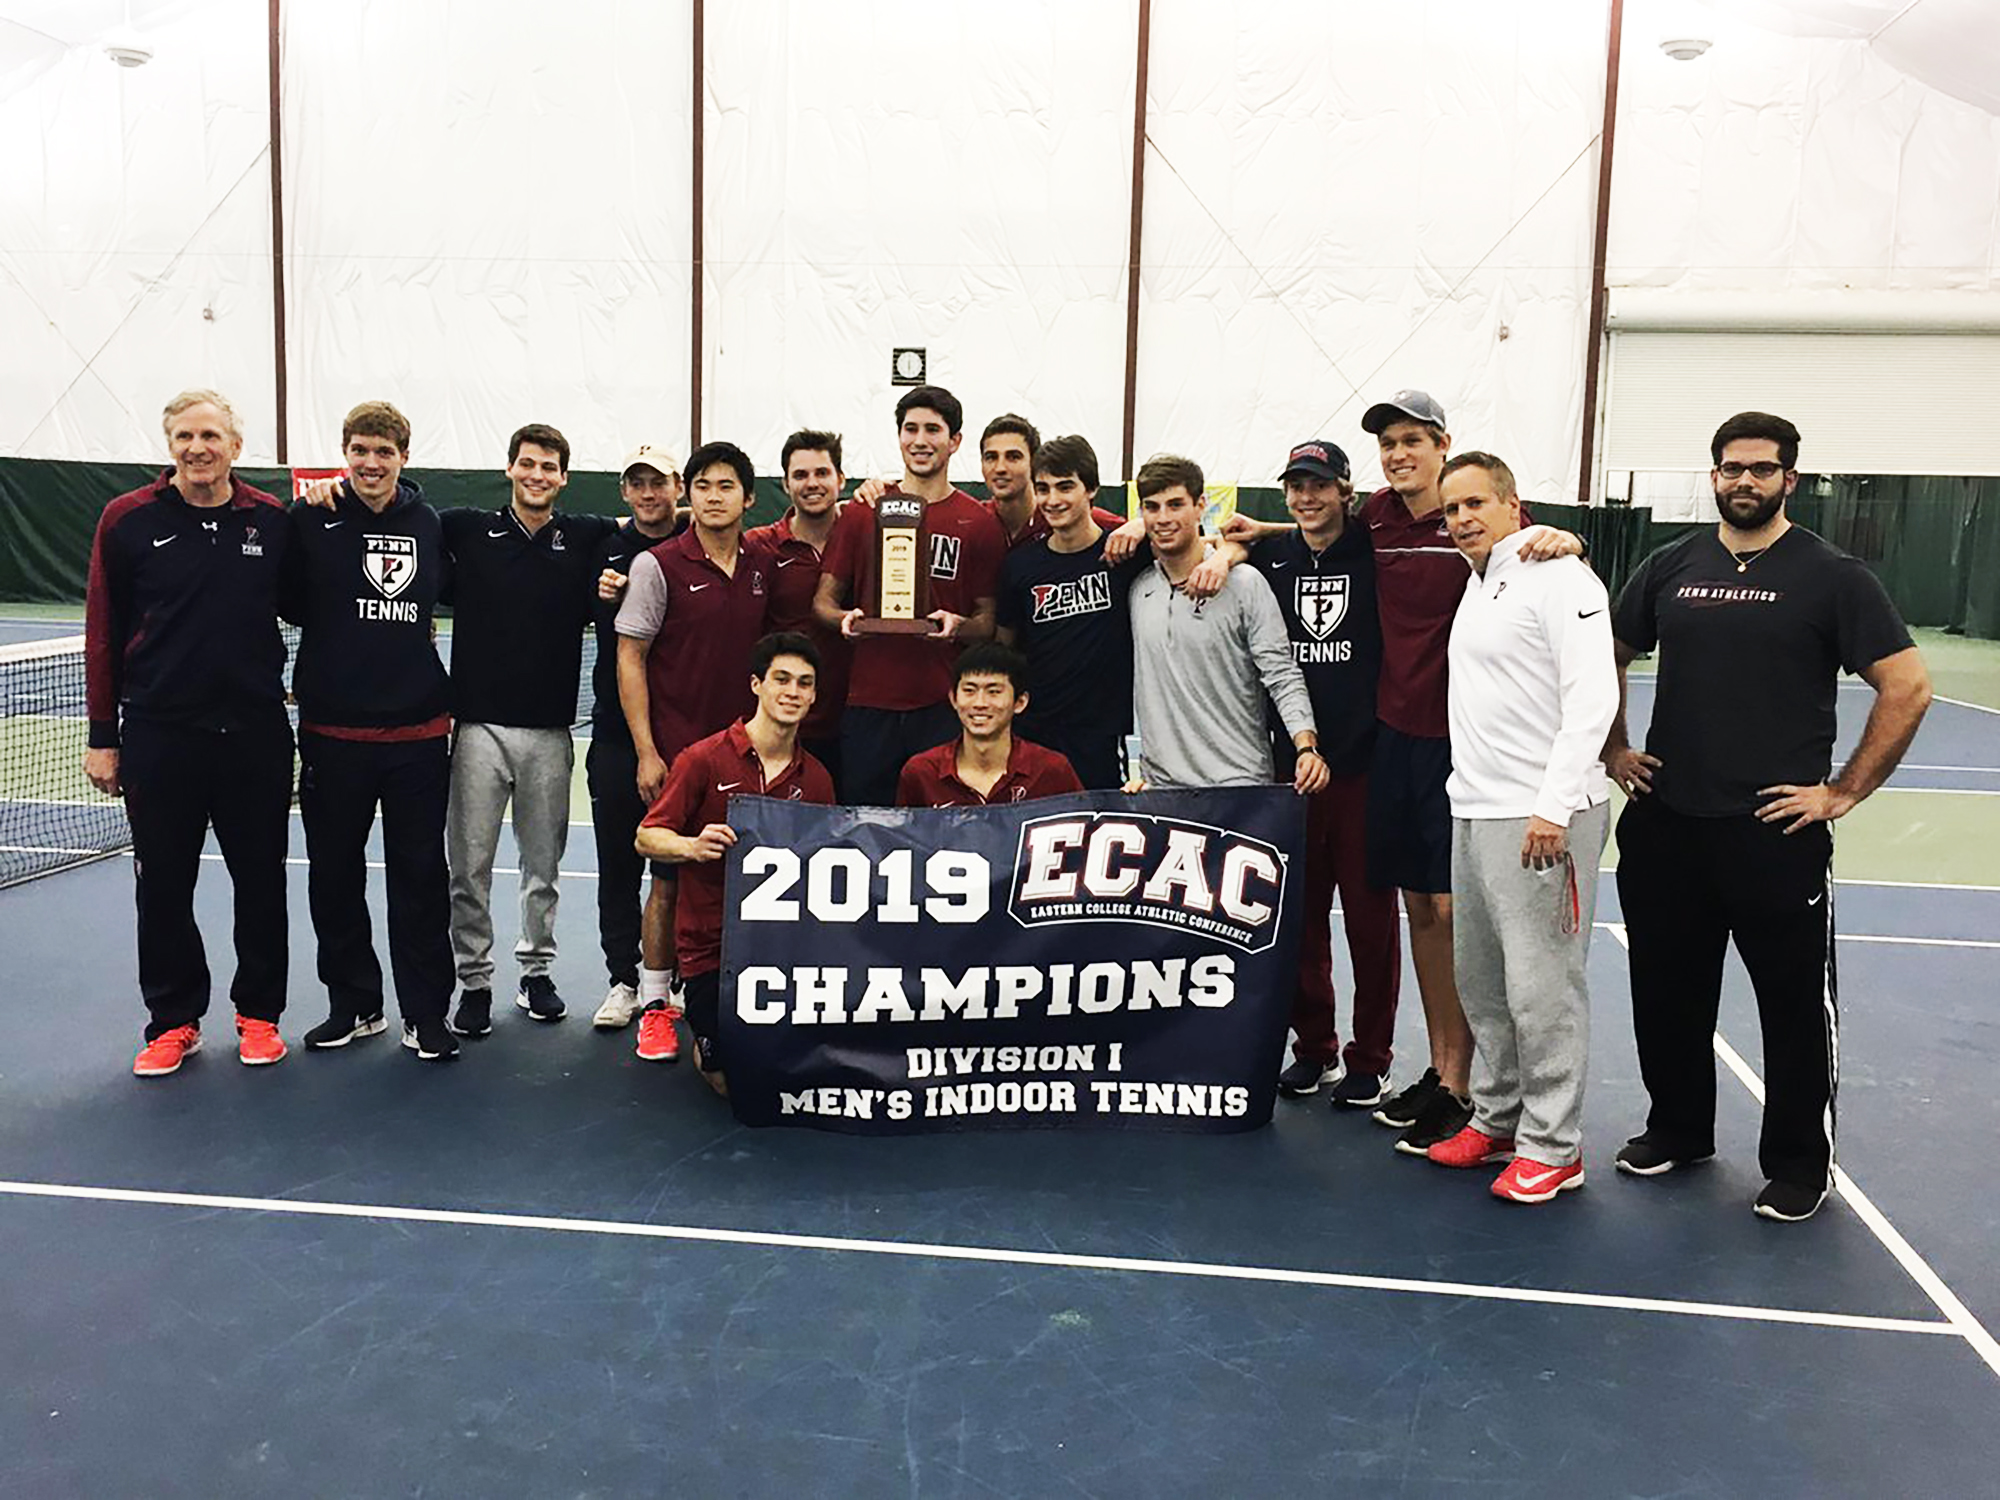 Men's tennis players and coaches pose with the 2019 ECAC Championship banner.